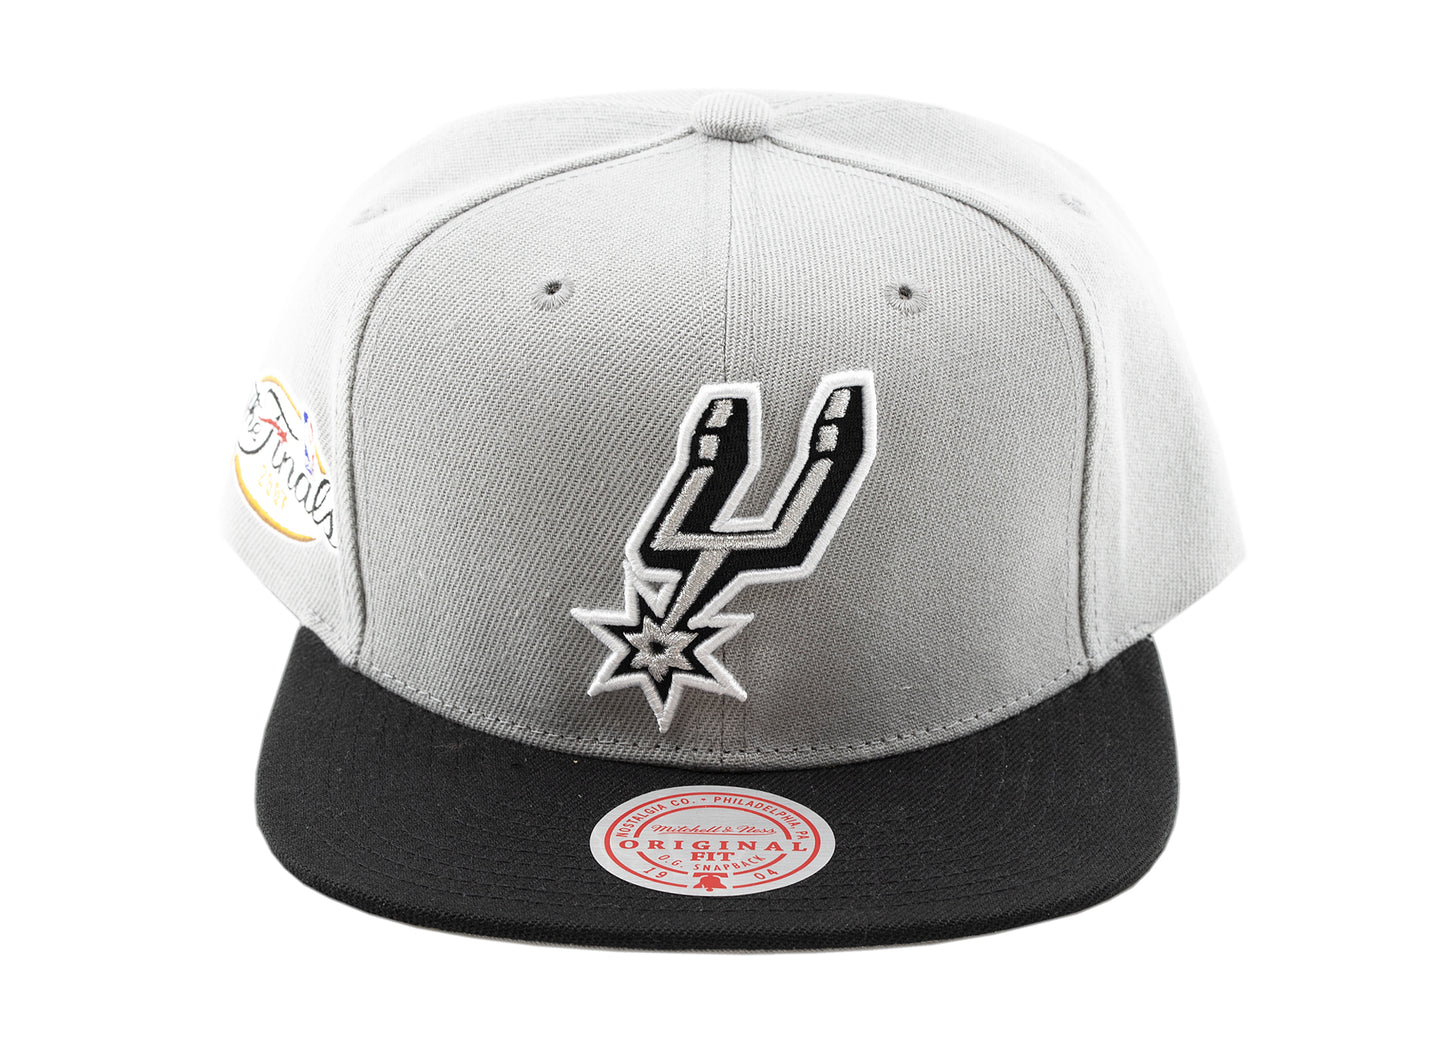 nba finals hat mitchell and ness